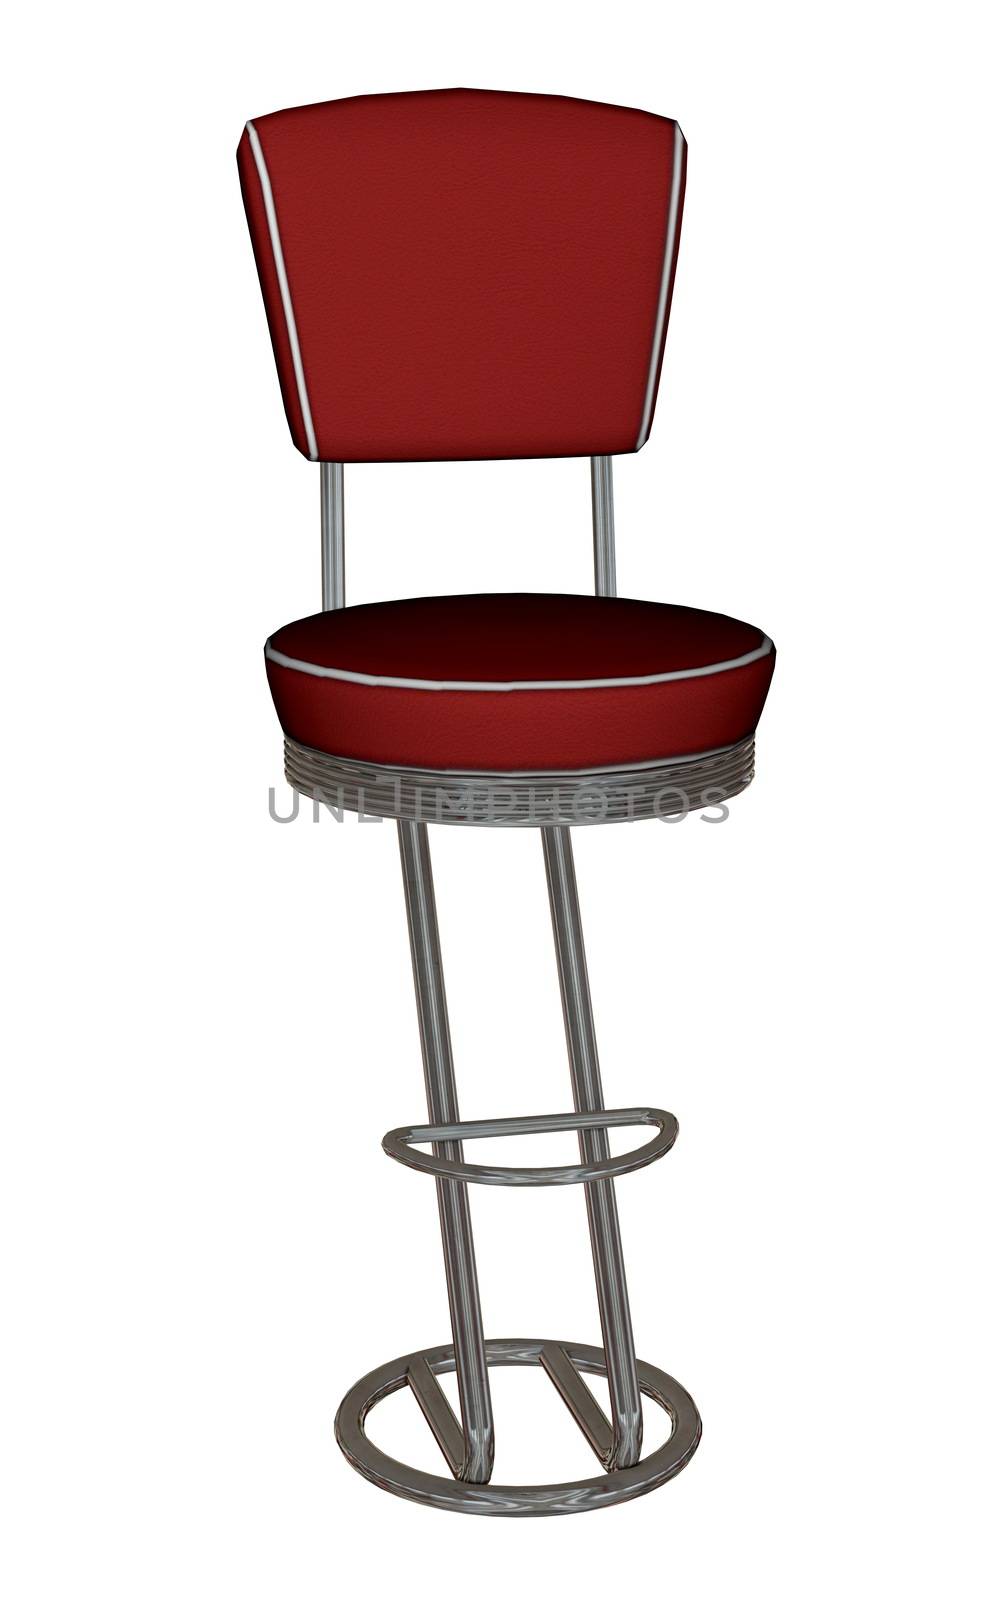 Red leather and chrome bar stool isolated on white background - 3D render